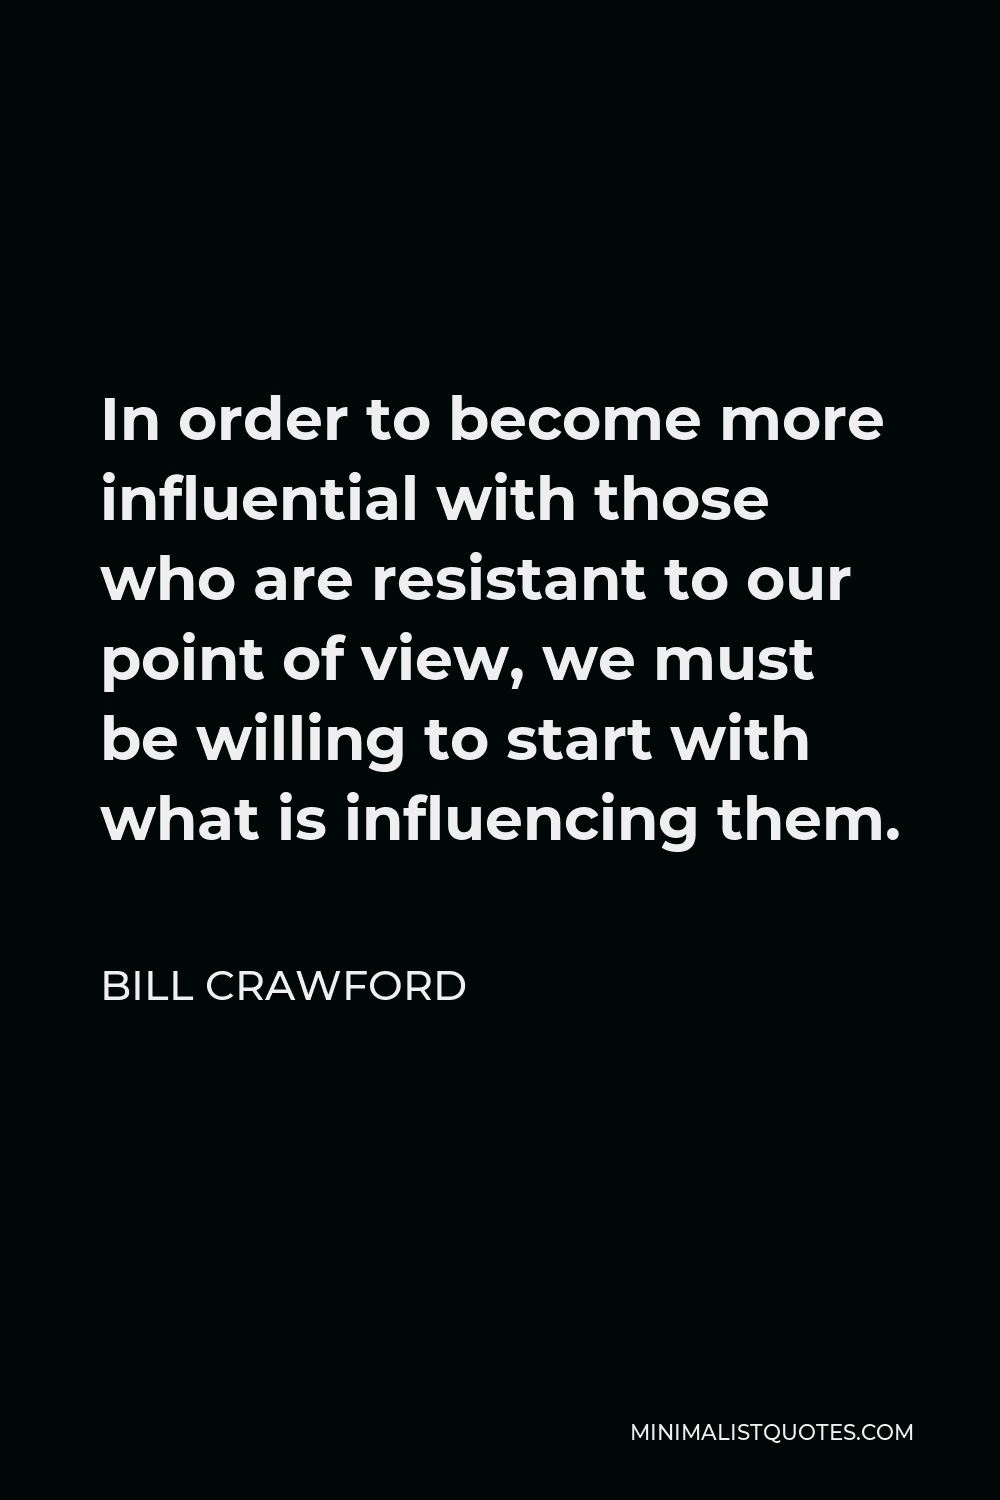 Bill Crawford Quote - In order to become more influential with those who are resistant to our point of view, we must be willing to start with what is influencing them.